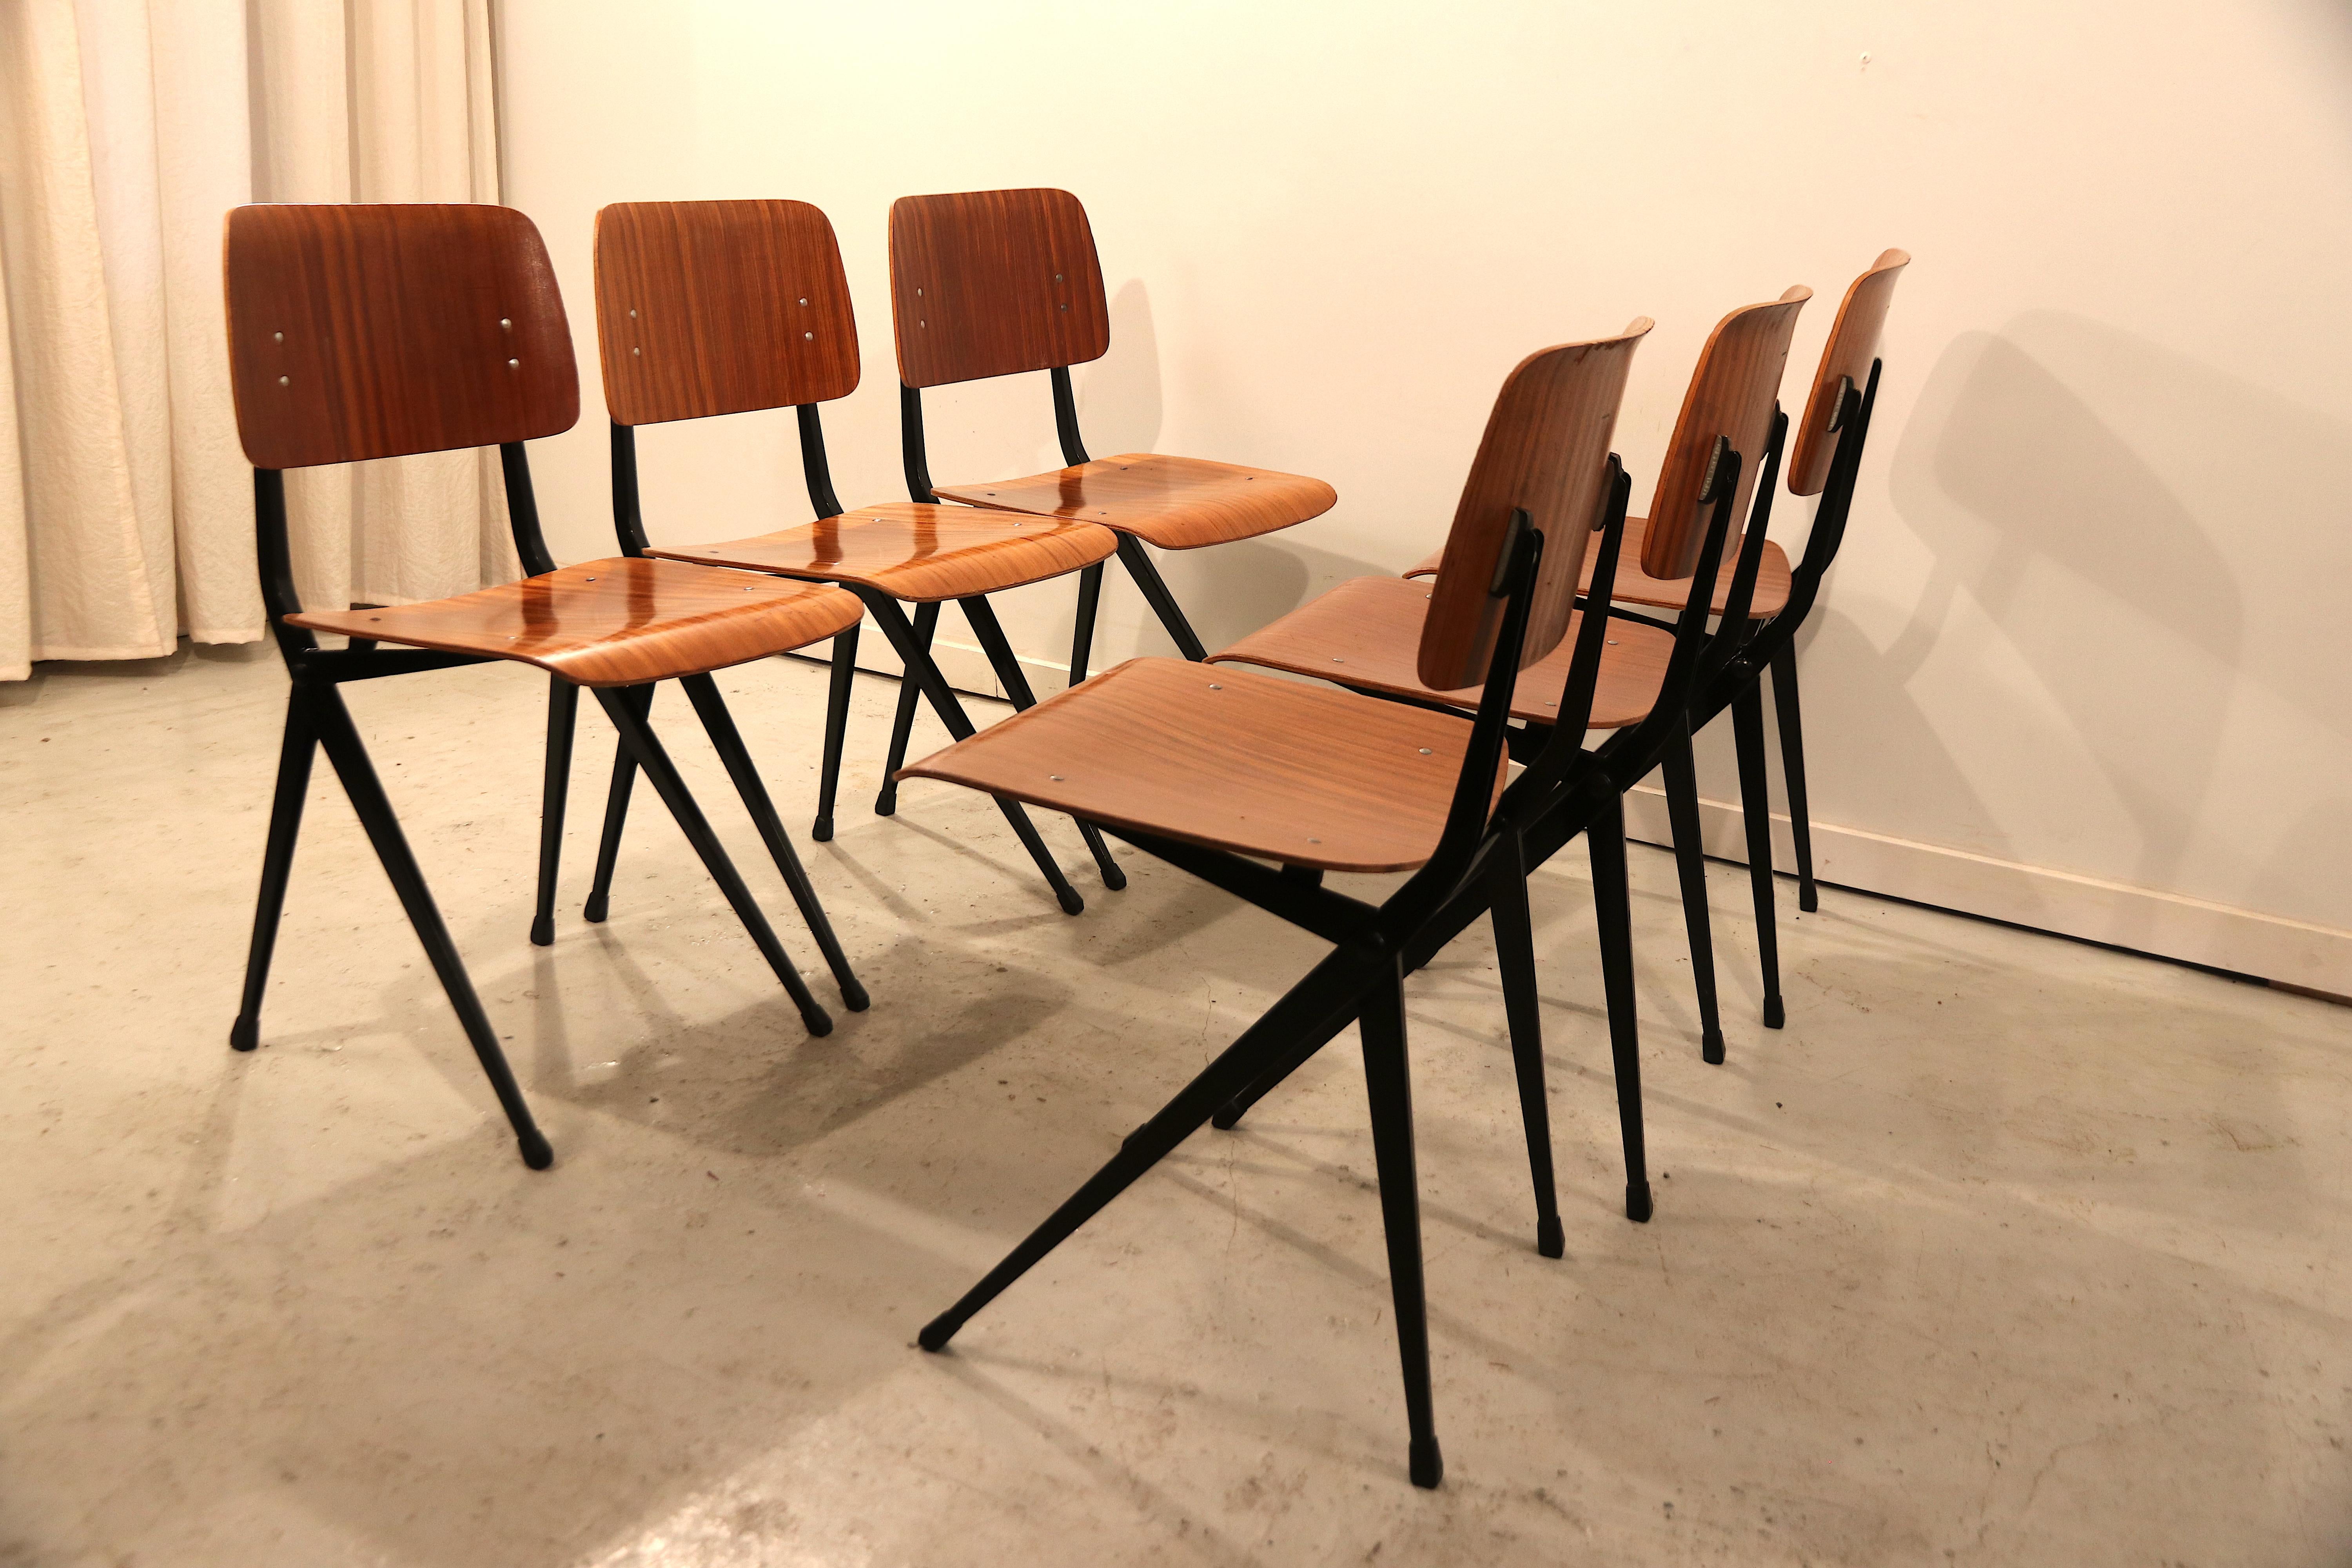 Set of 6 industrial spider leg or compass-needle leg chairs with a beautiful plywood seat and backrest. These are slightly larger than the usual type of seat and back that is typically used for these chairs (see other listing). This makes them more